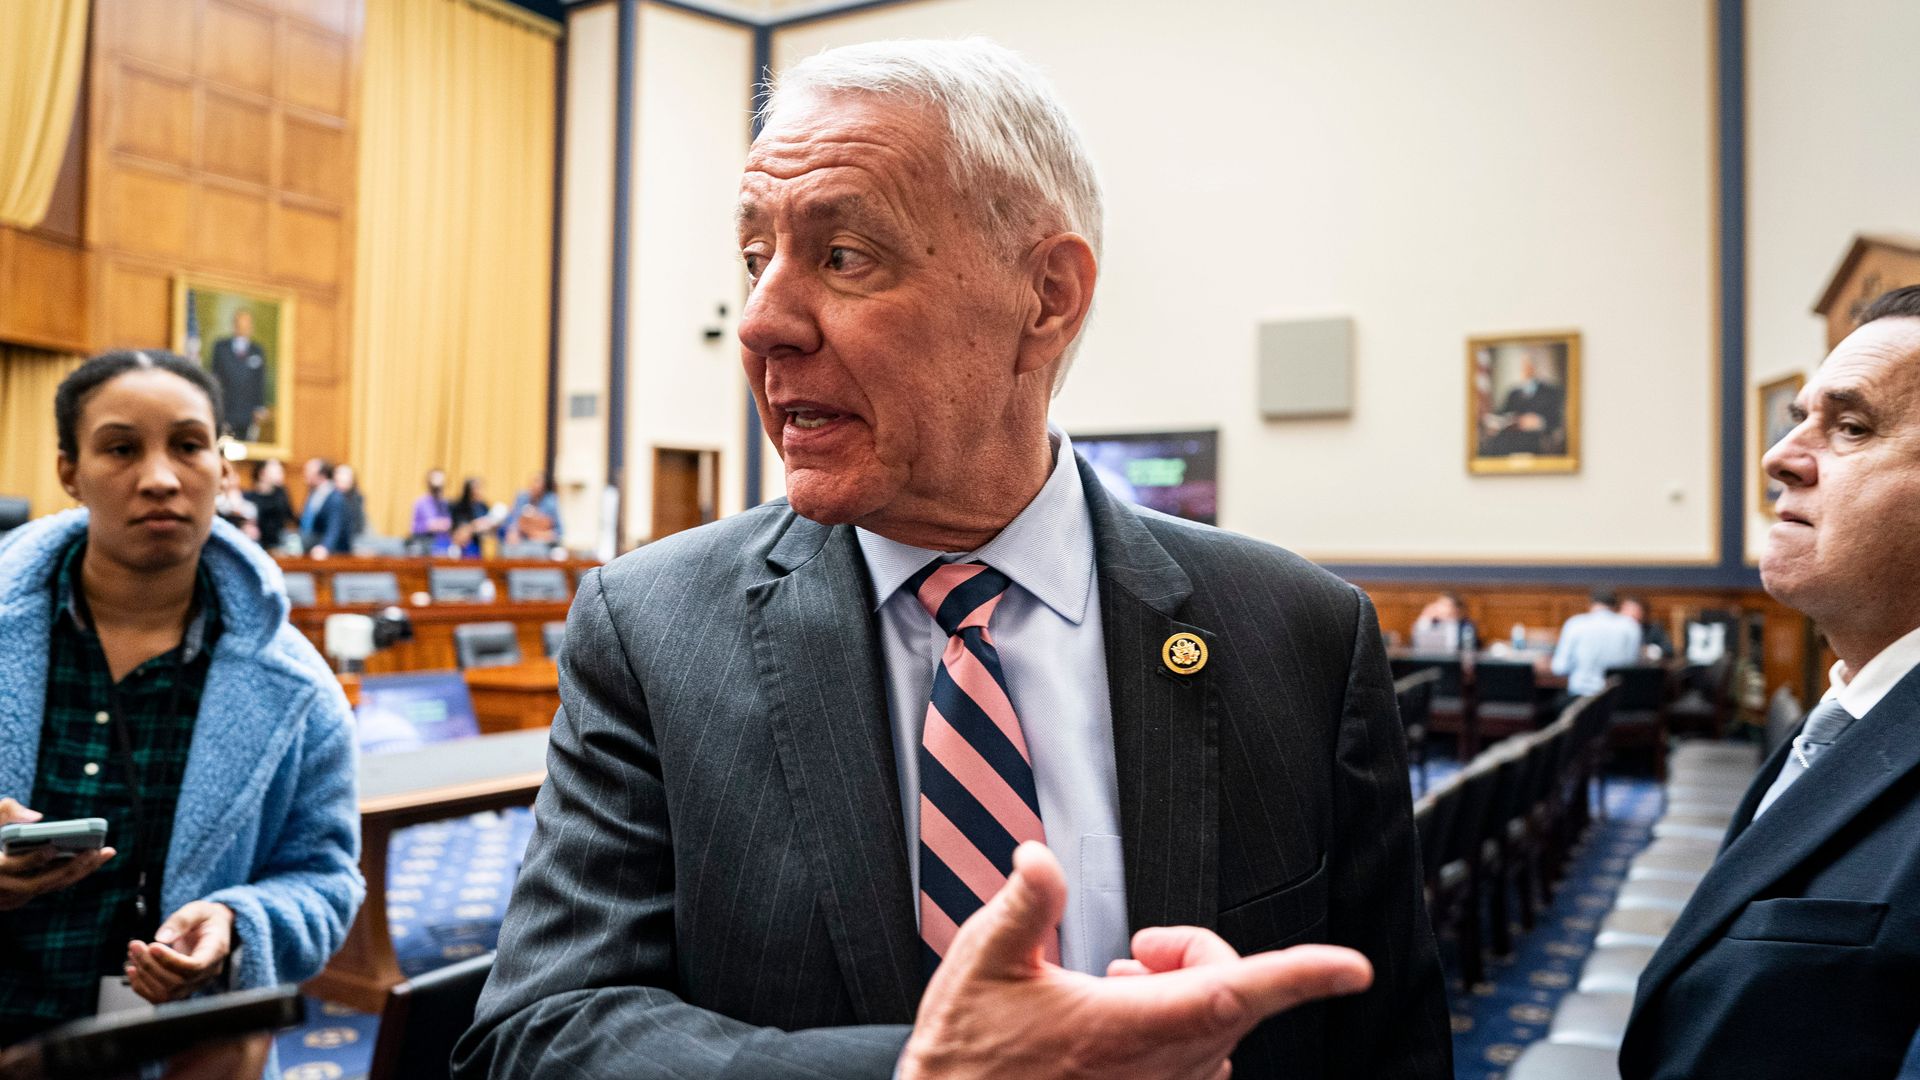 Rep. Ken Buck, wearing a gray suit, light blue shirt and blue and pink striped tie, points off to the side in a congressional hearing room.